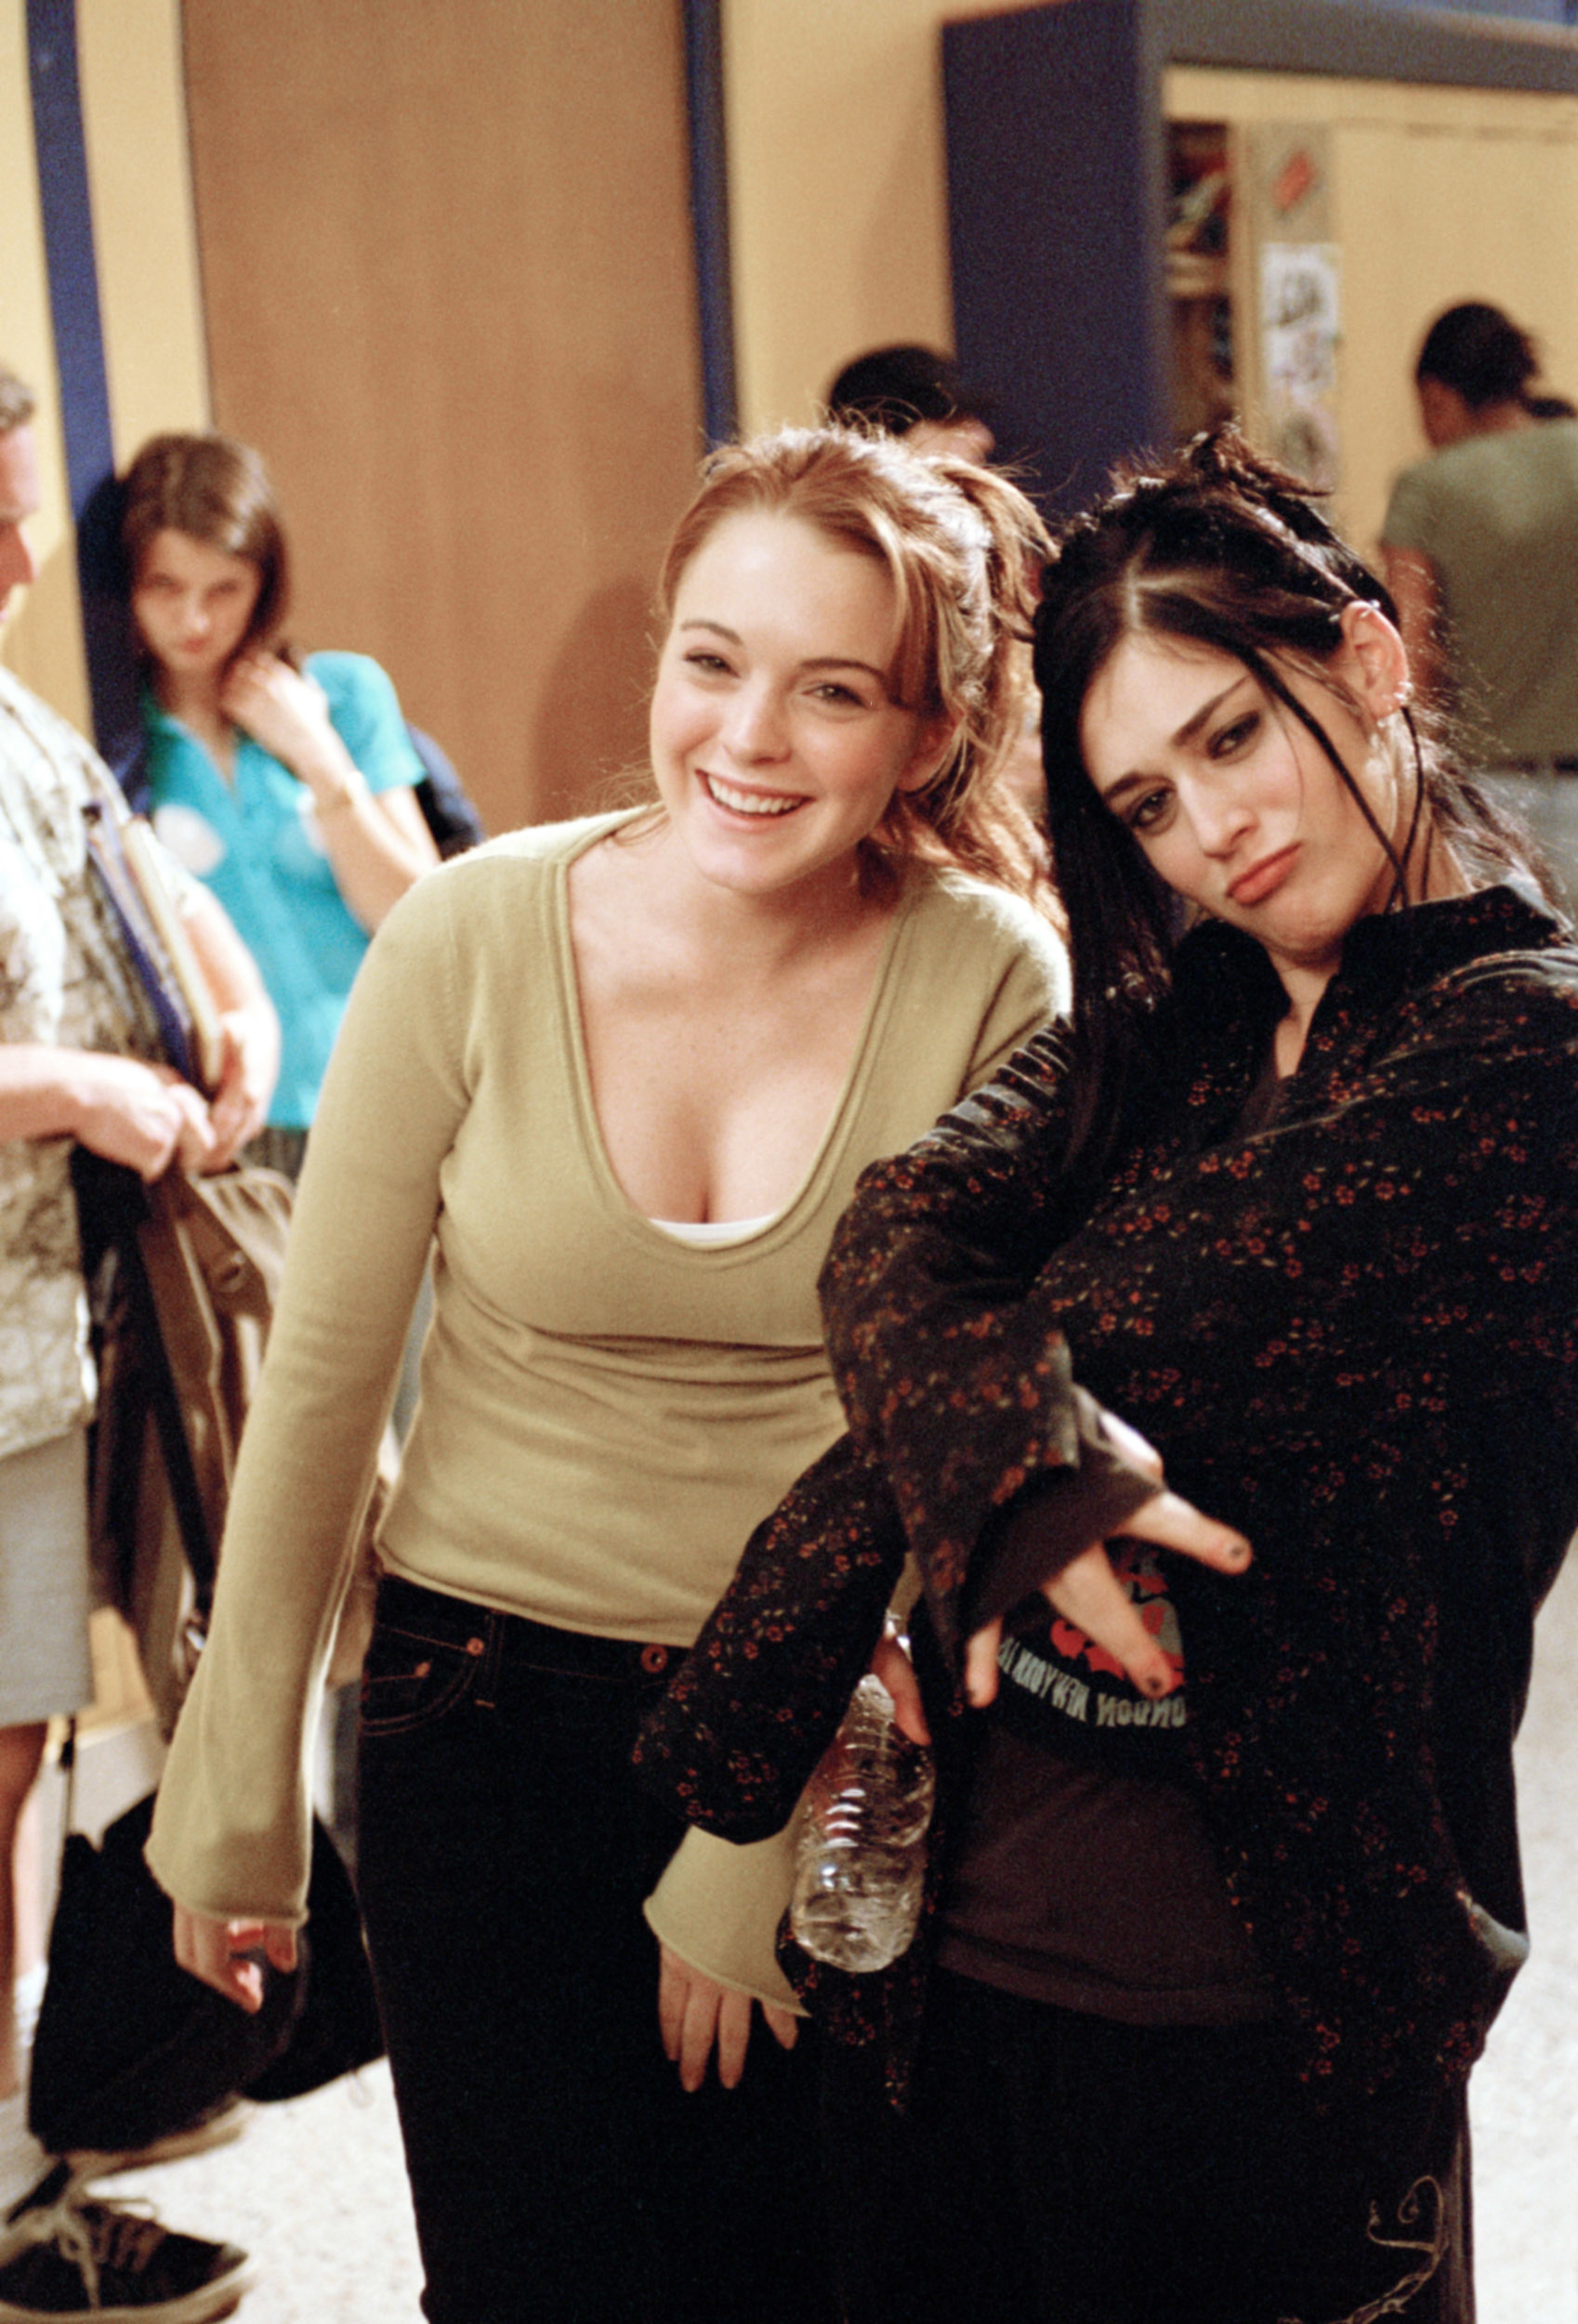 Behind the scenes of &quot;Mean Girls&quot;